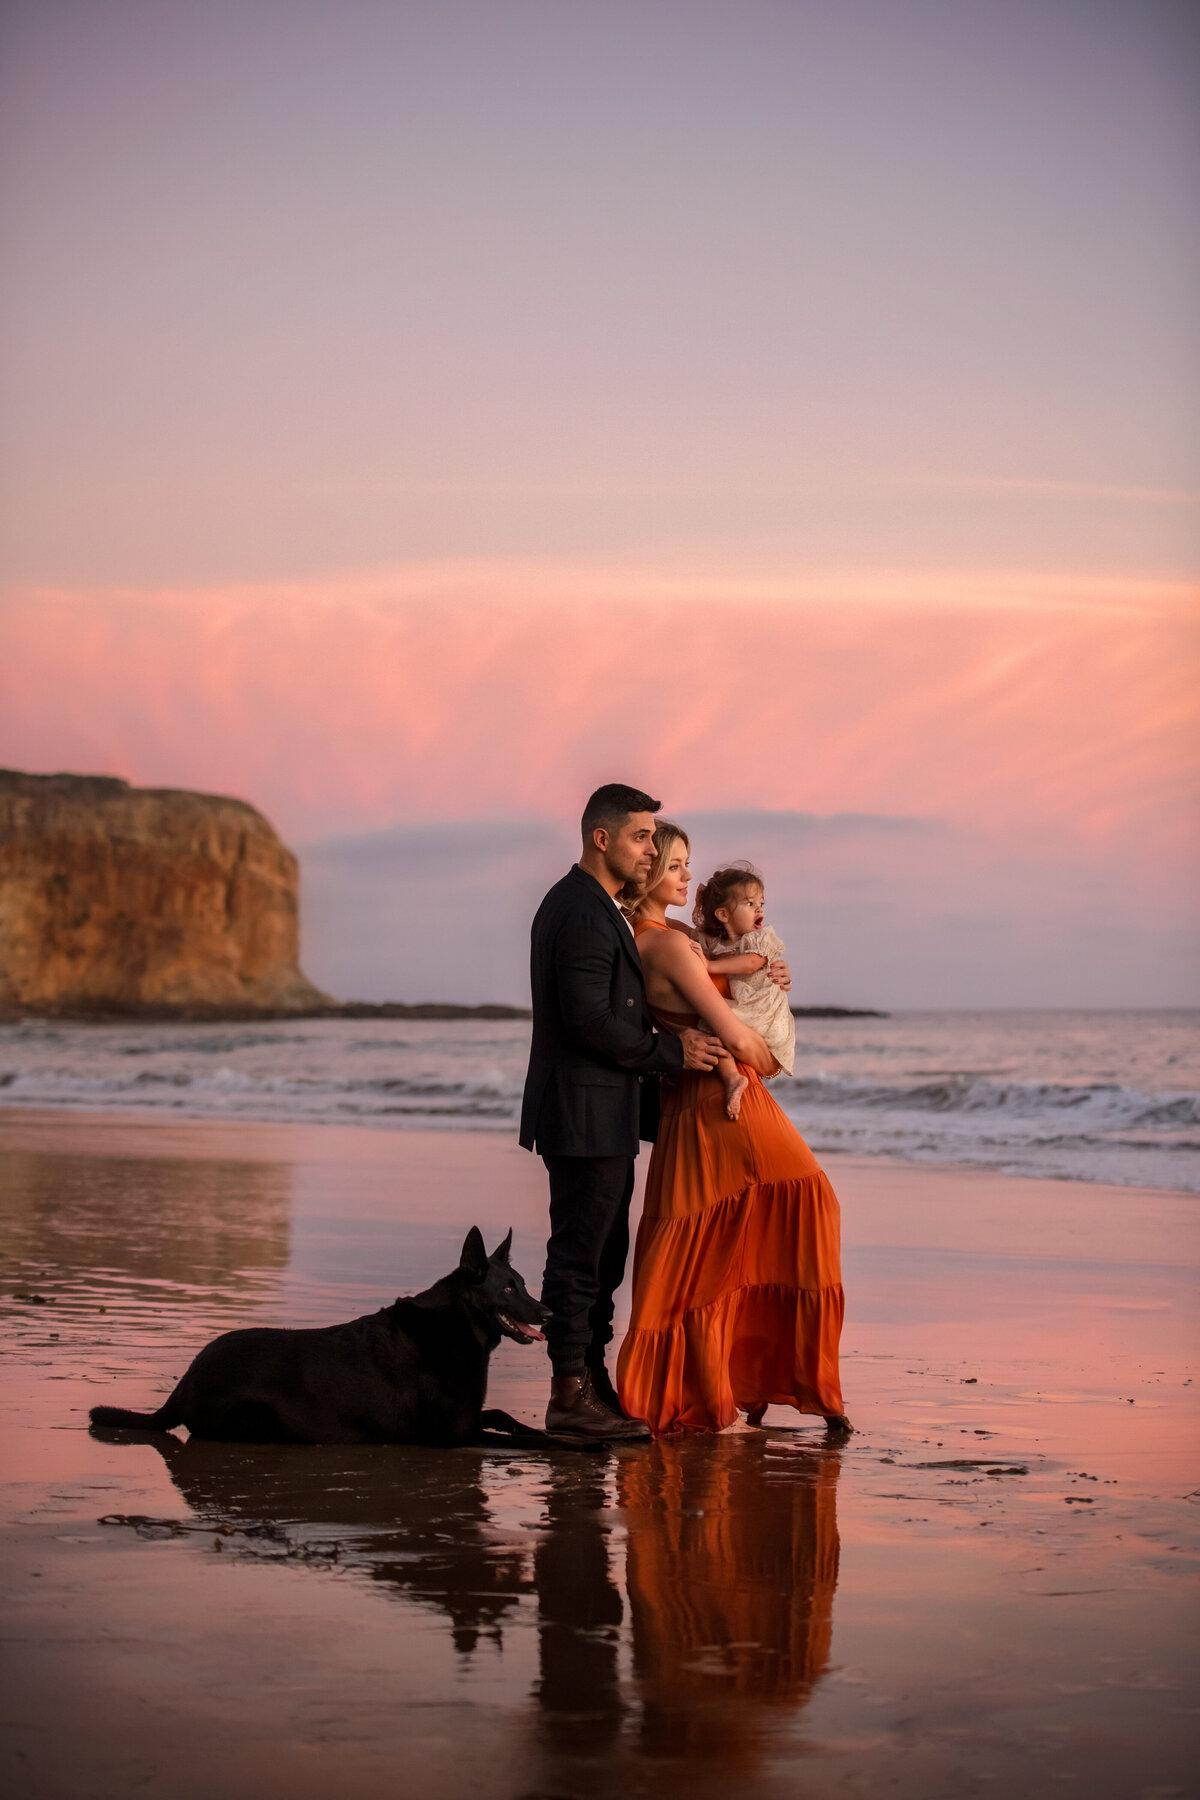 Wilmer Valderrama with his wife, daughter and dog enjoying pink sunset at Palos Verdes beach in California.